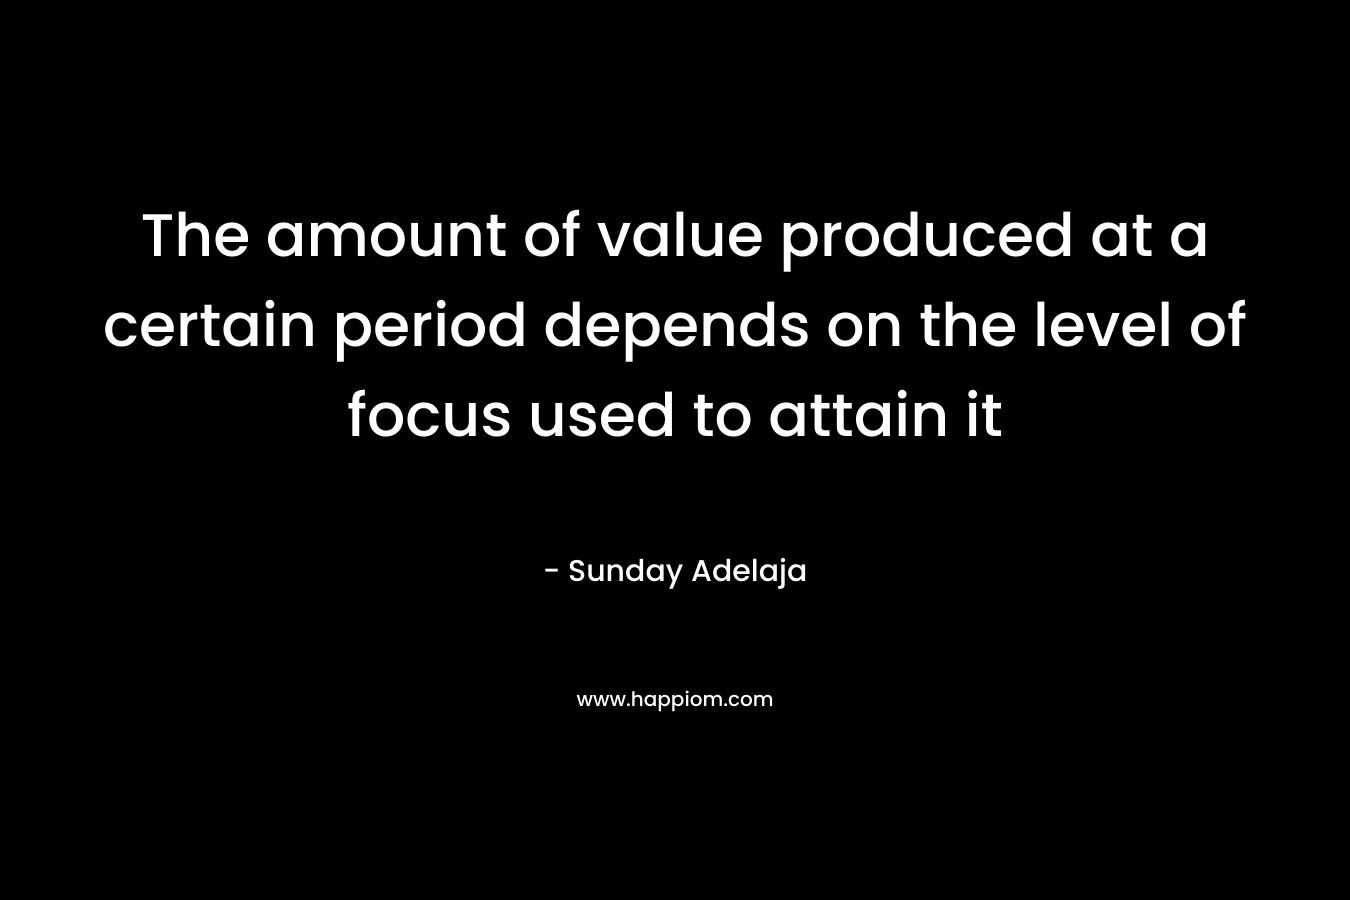 The amount of value produced at a certain period depends on the level of focus used to attain it